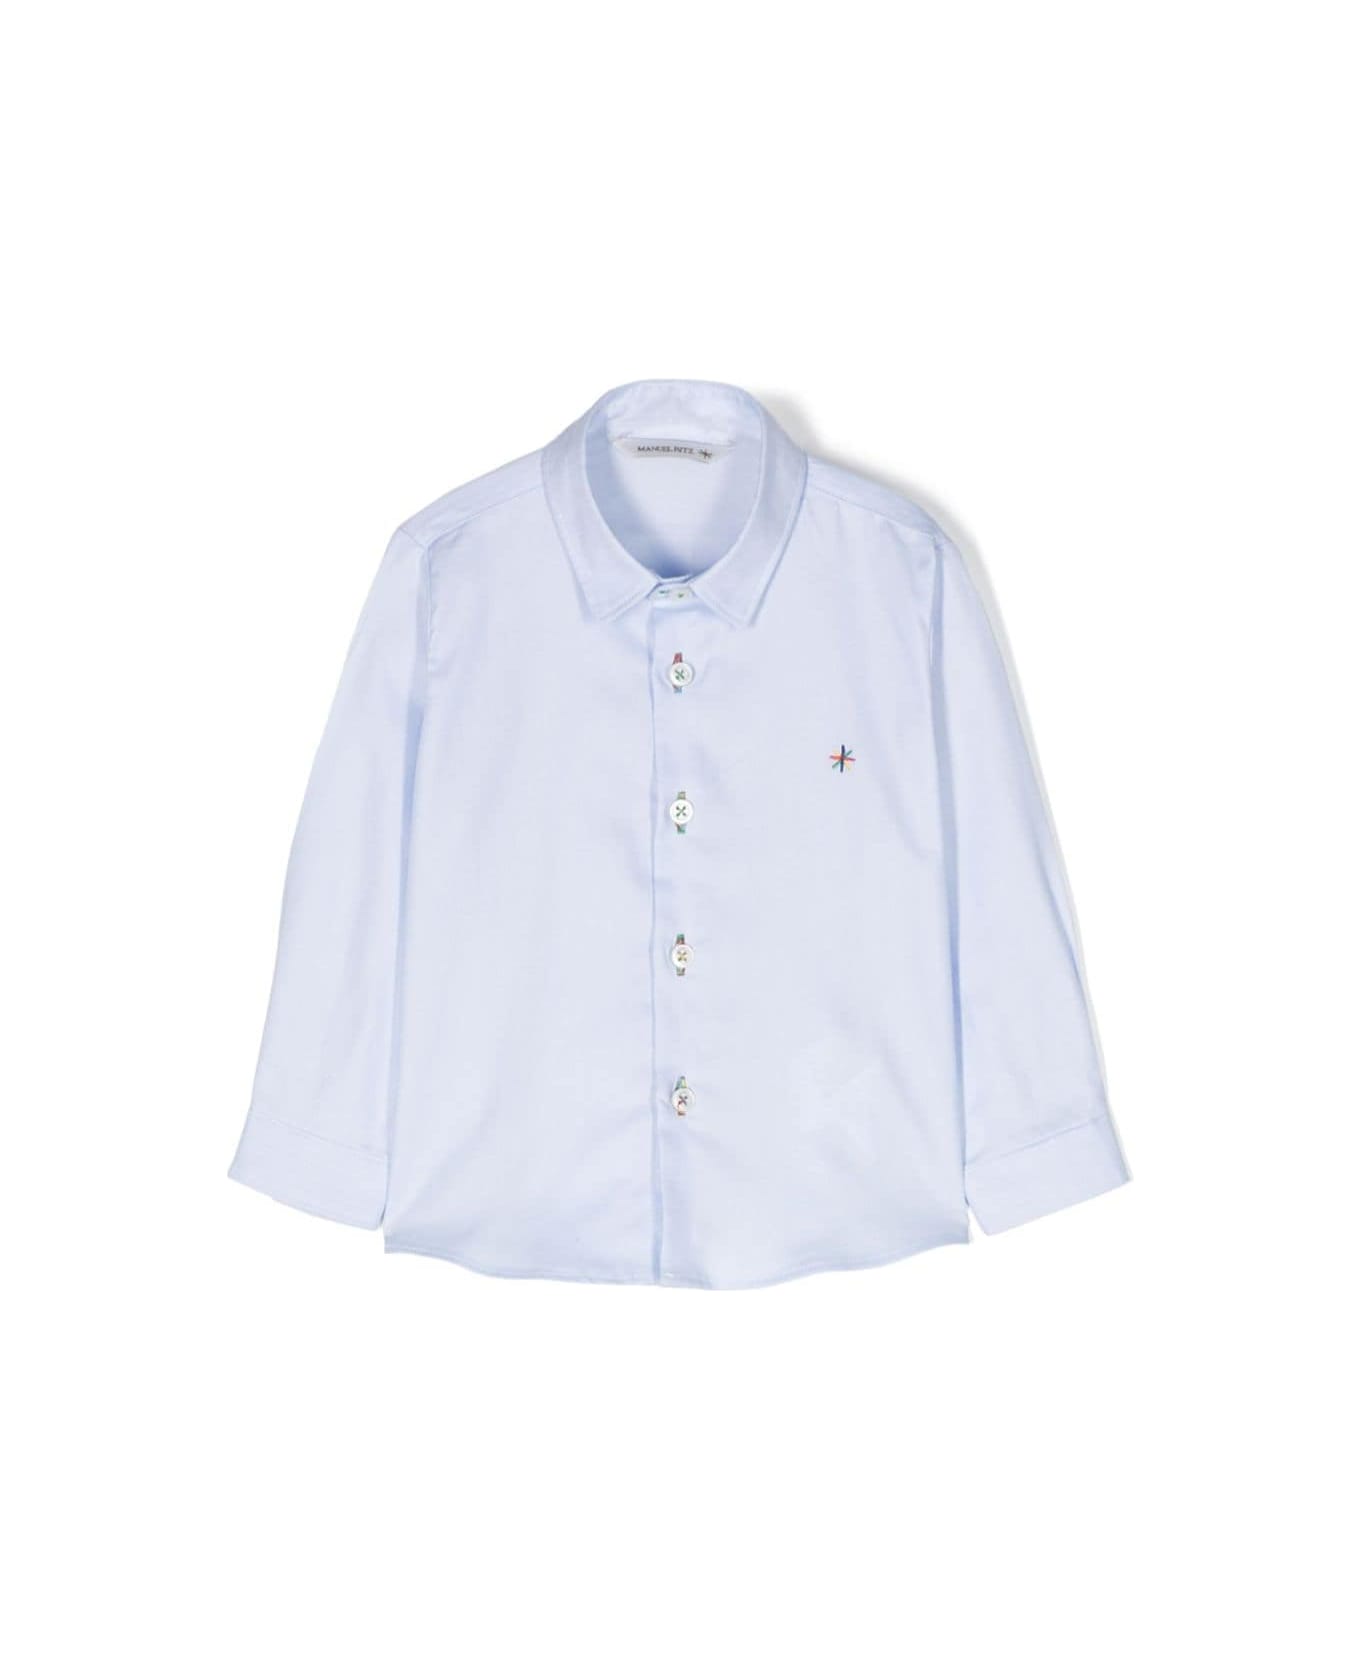 Manuel Ritz Shirt With Embroidery - Light blue